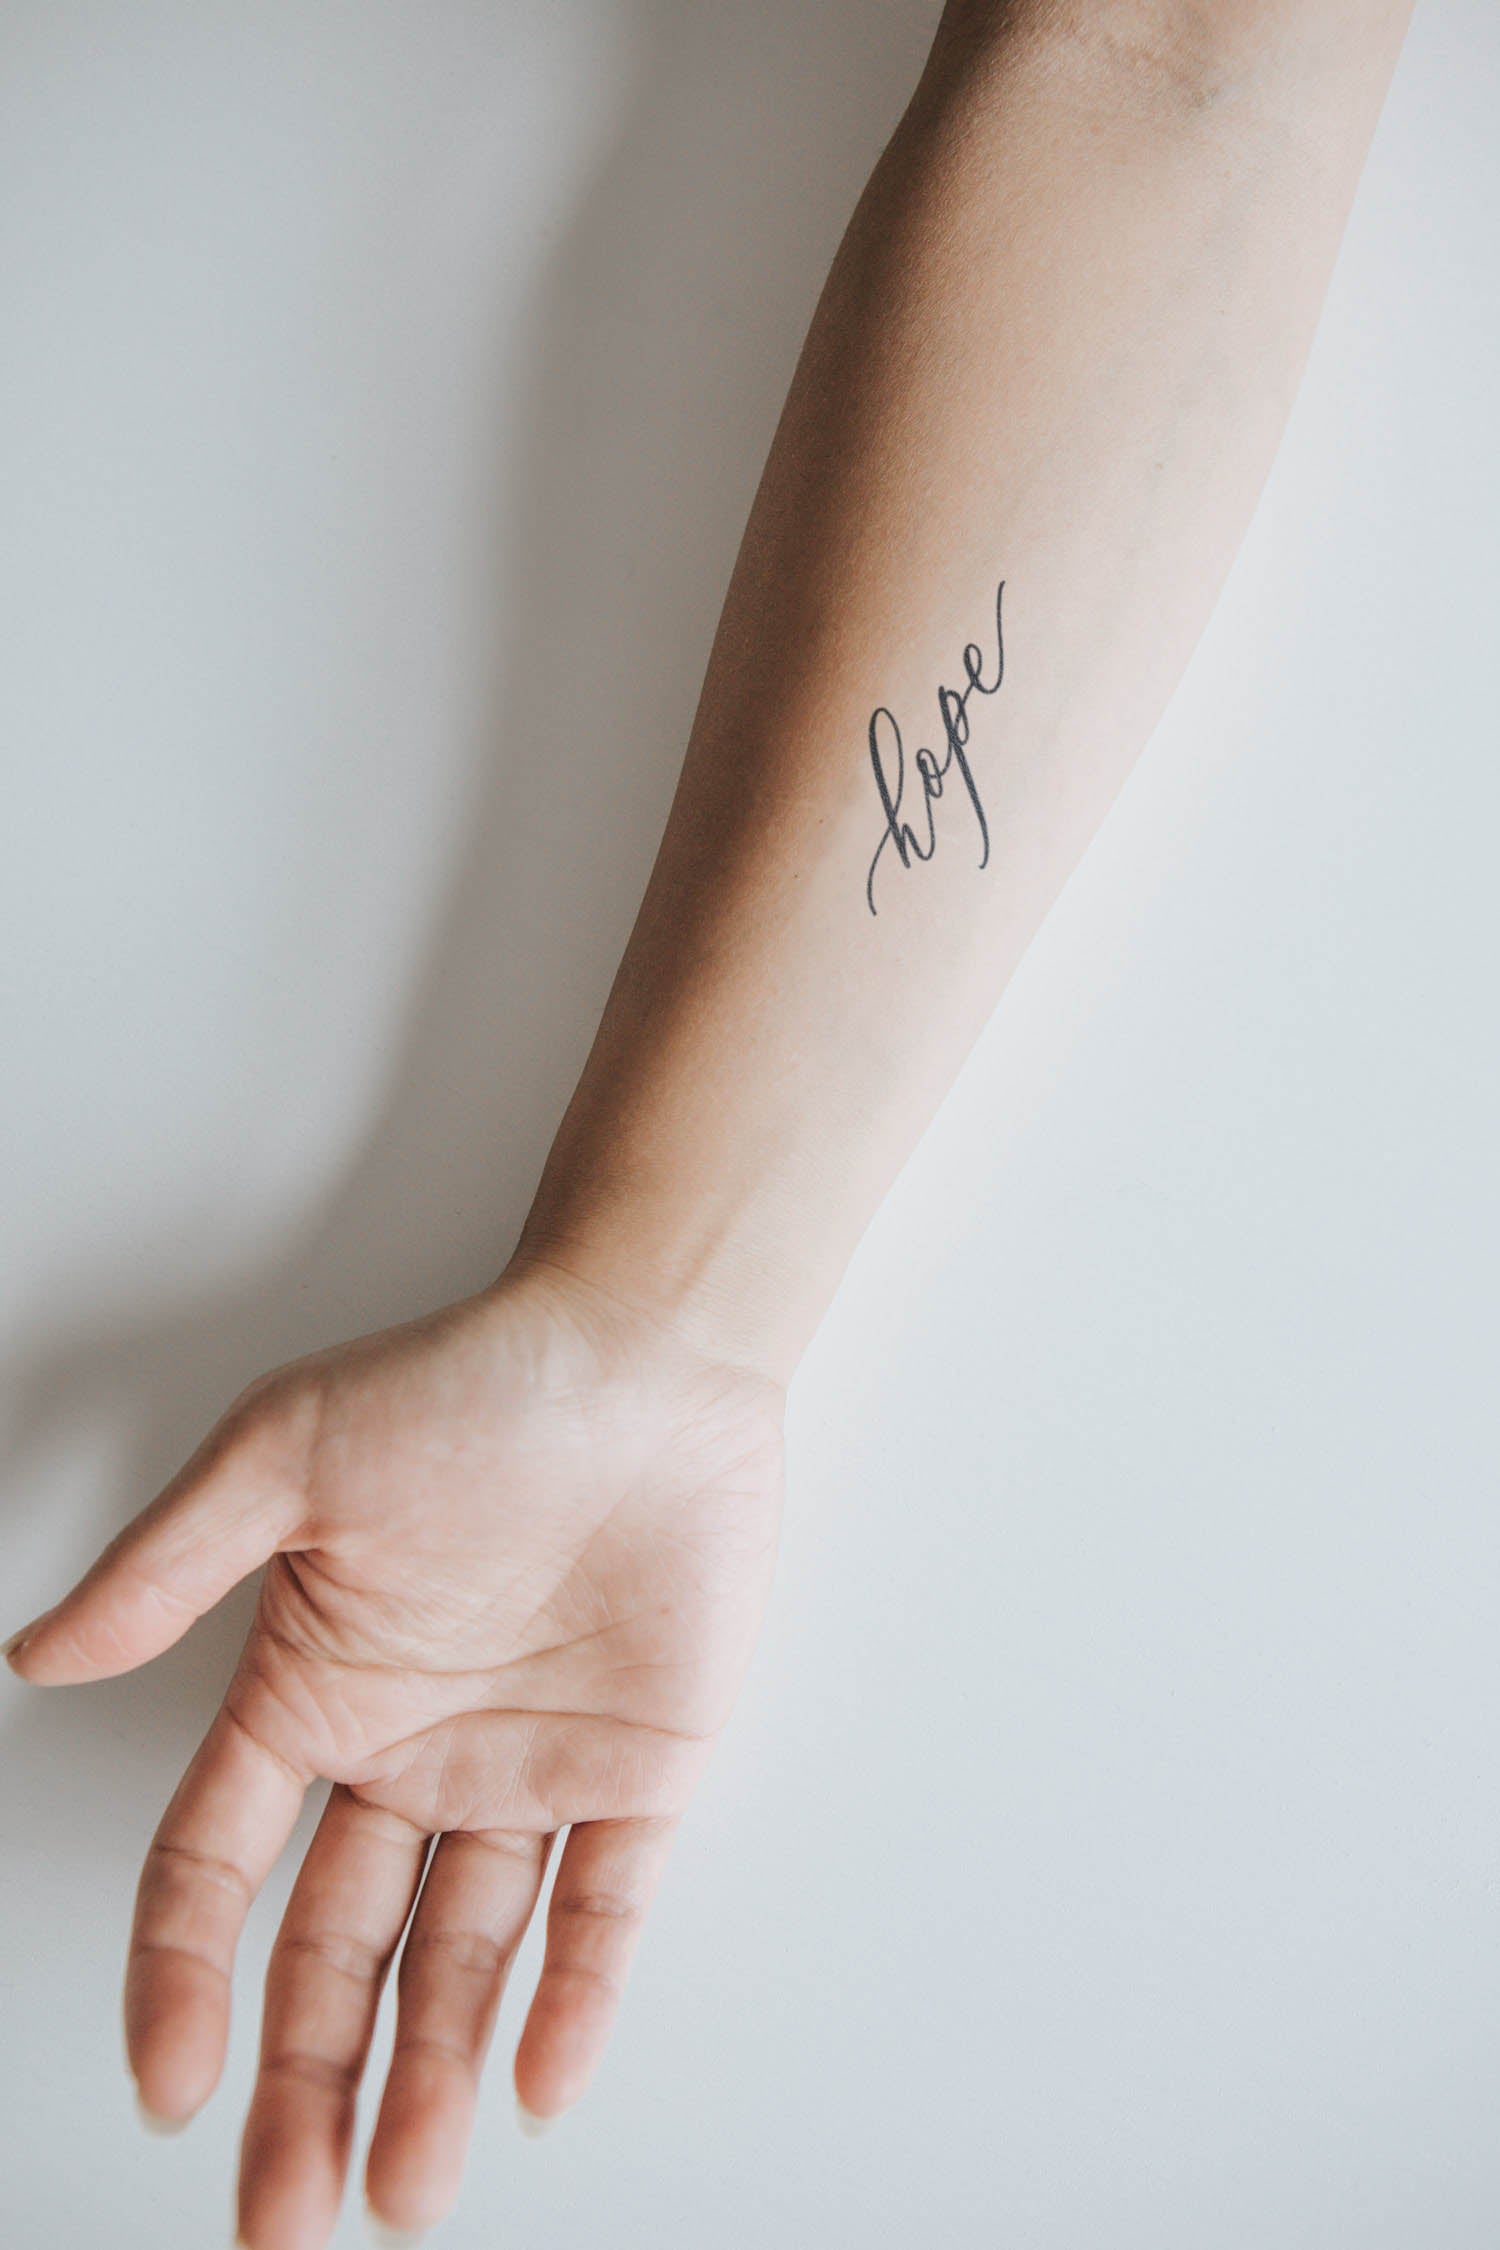 delicate word tattoos